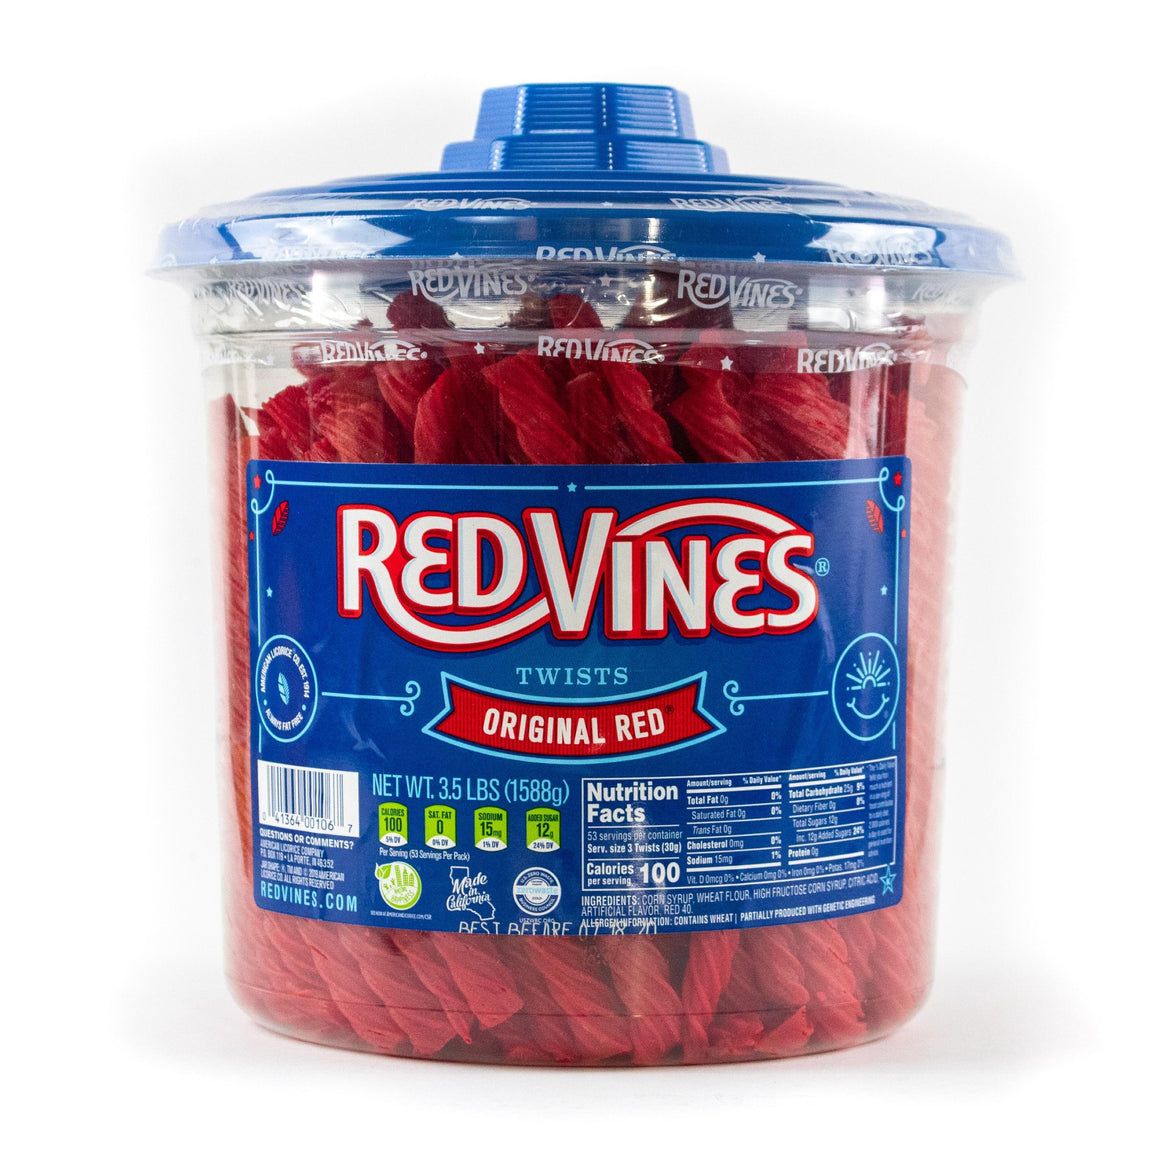 All City Candy Red Vines Original Red Licorice Twists - 3.5 LB Tub Licorice American Licorice Company For fresh candy and great service, visit www.allcitycandy.com